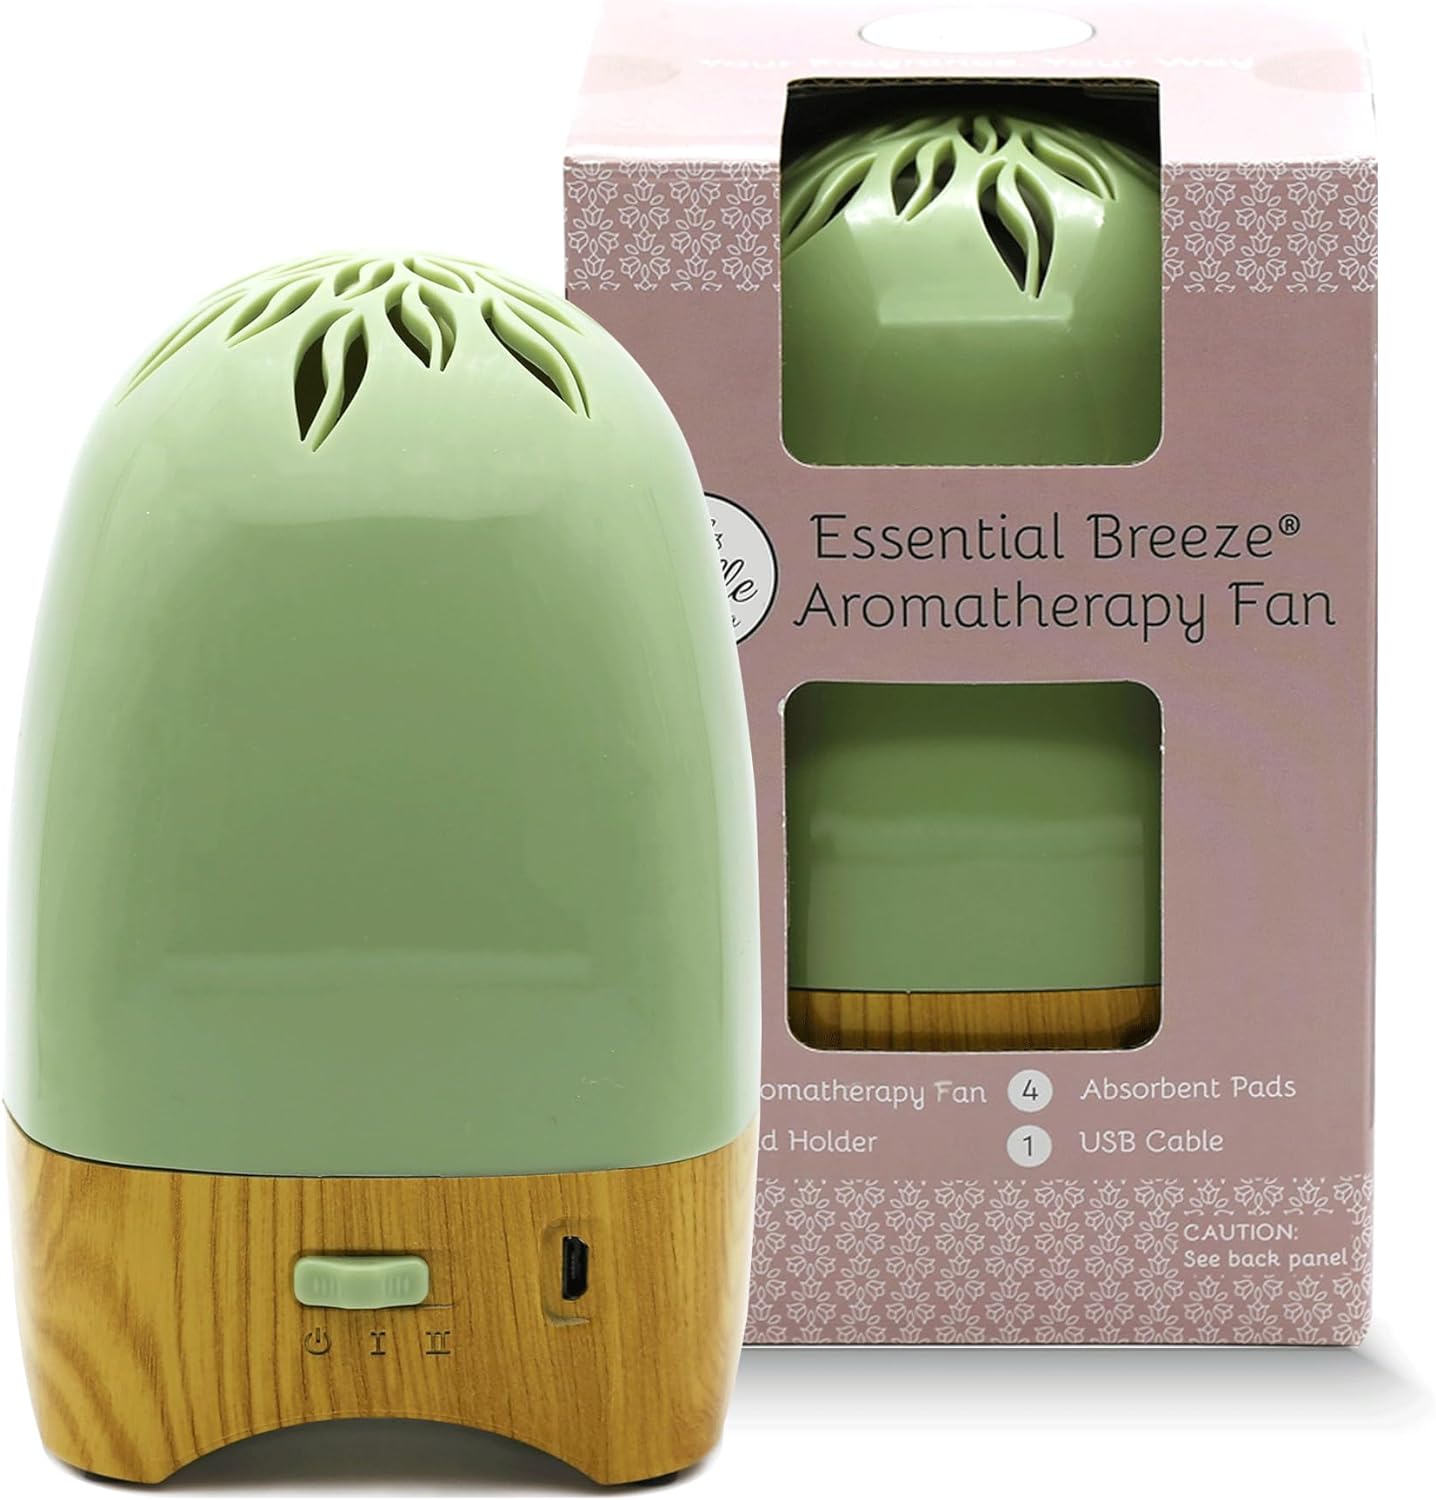 The Essential Breeze® Aromatherapy Fan Essential Oil Diffuser with VersaScent® Technology  aromatherapy